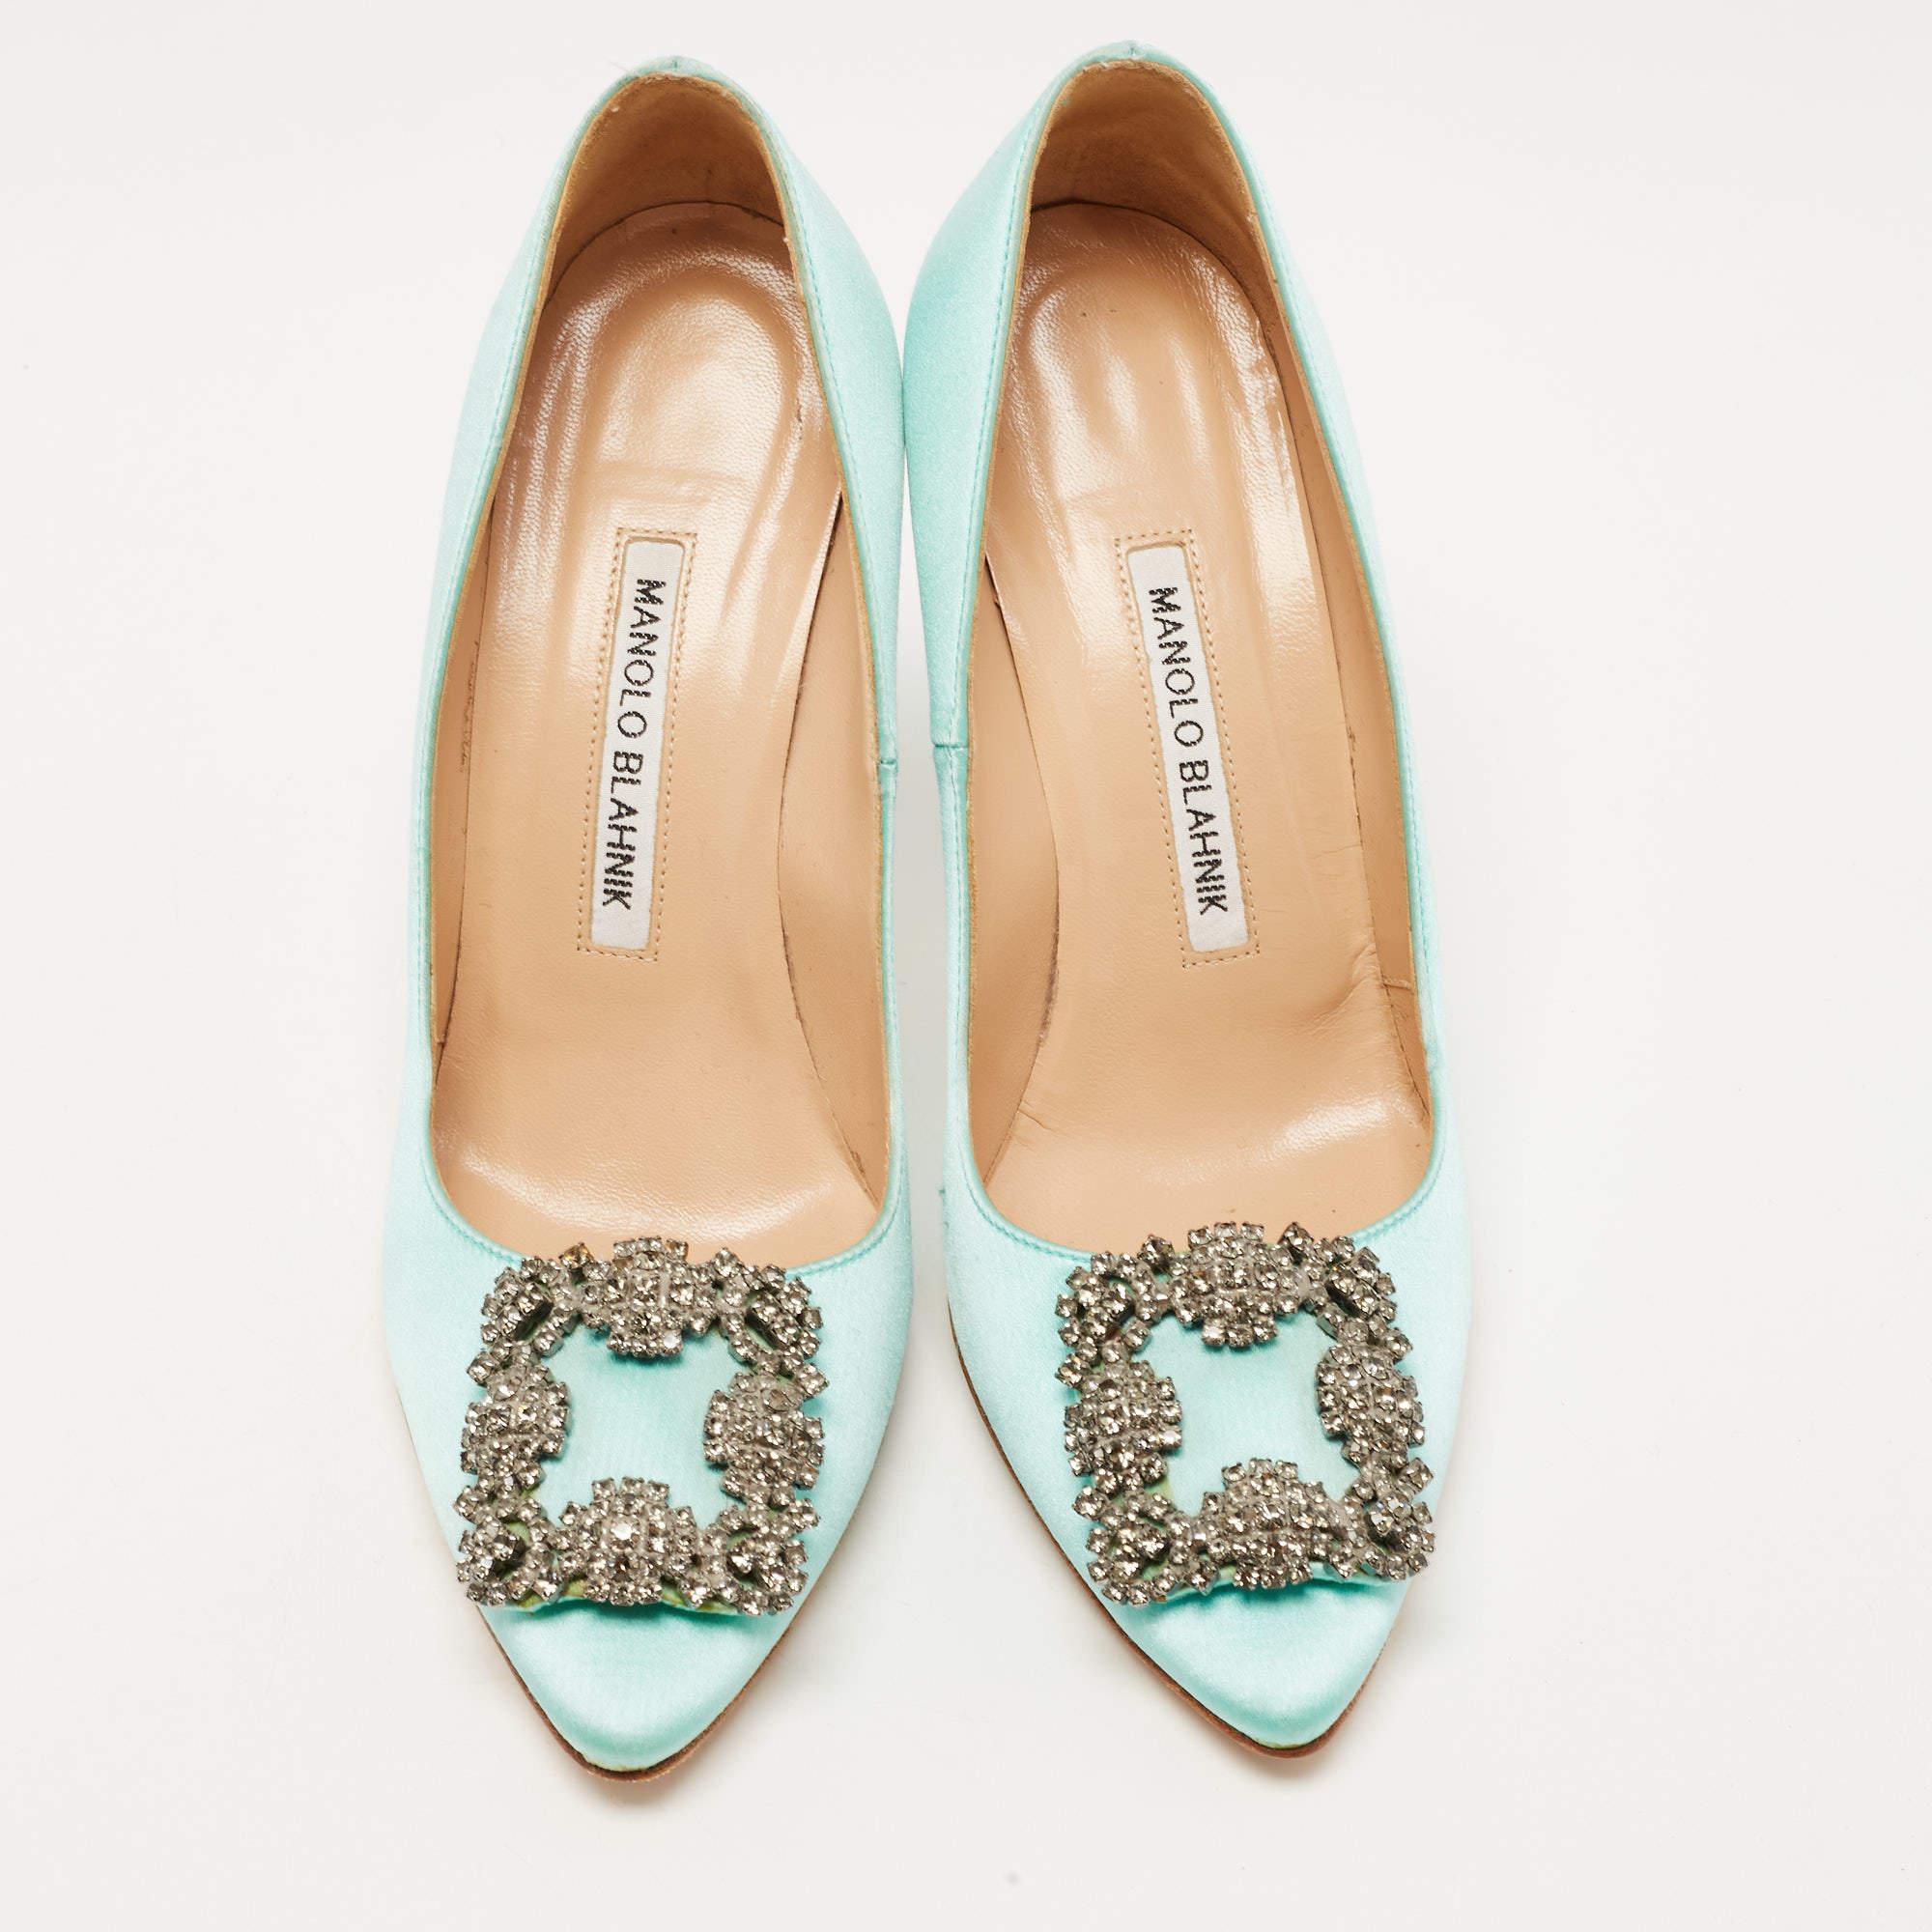 Manolo Blahnik is synonymous with feminine elegance and unquestionable skill. The iconic Hangisi pumps embody the best of the brand. These ones are crafted using turquoise satin and have a crystal-embellished buckle highlighting the toes. They are